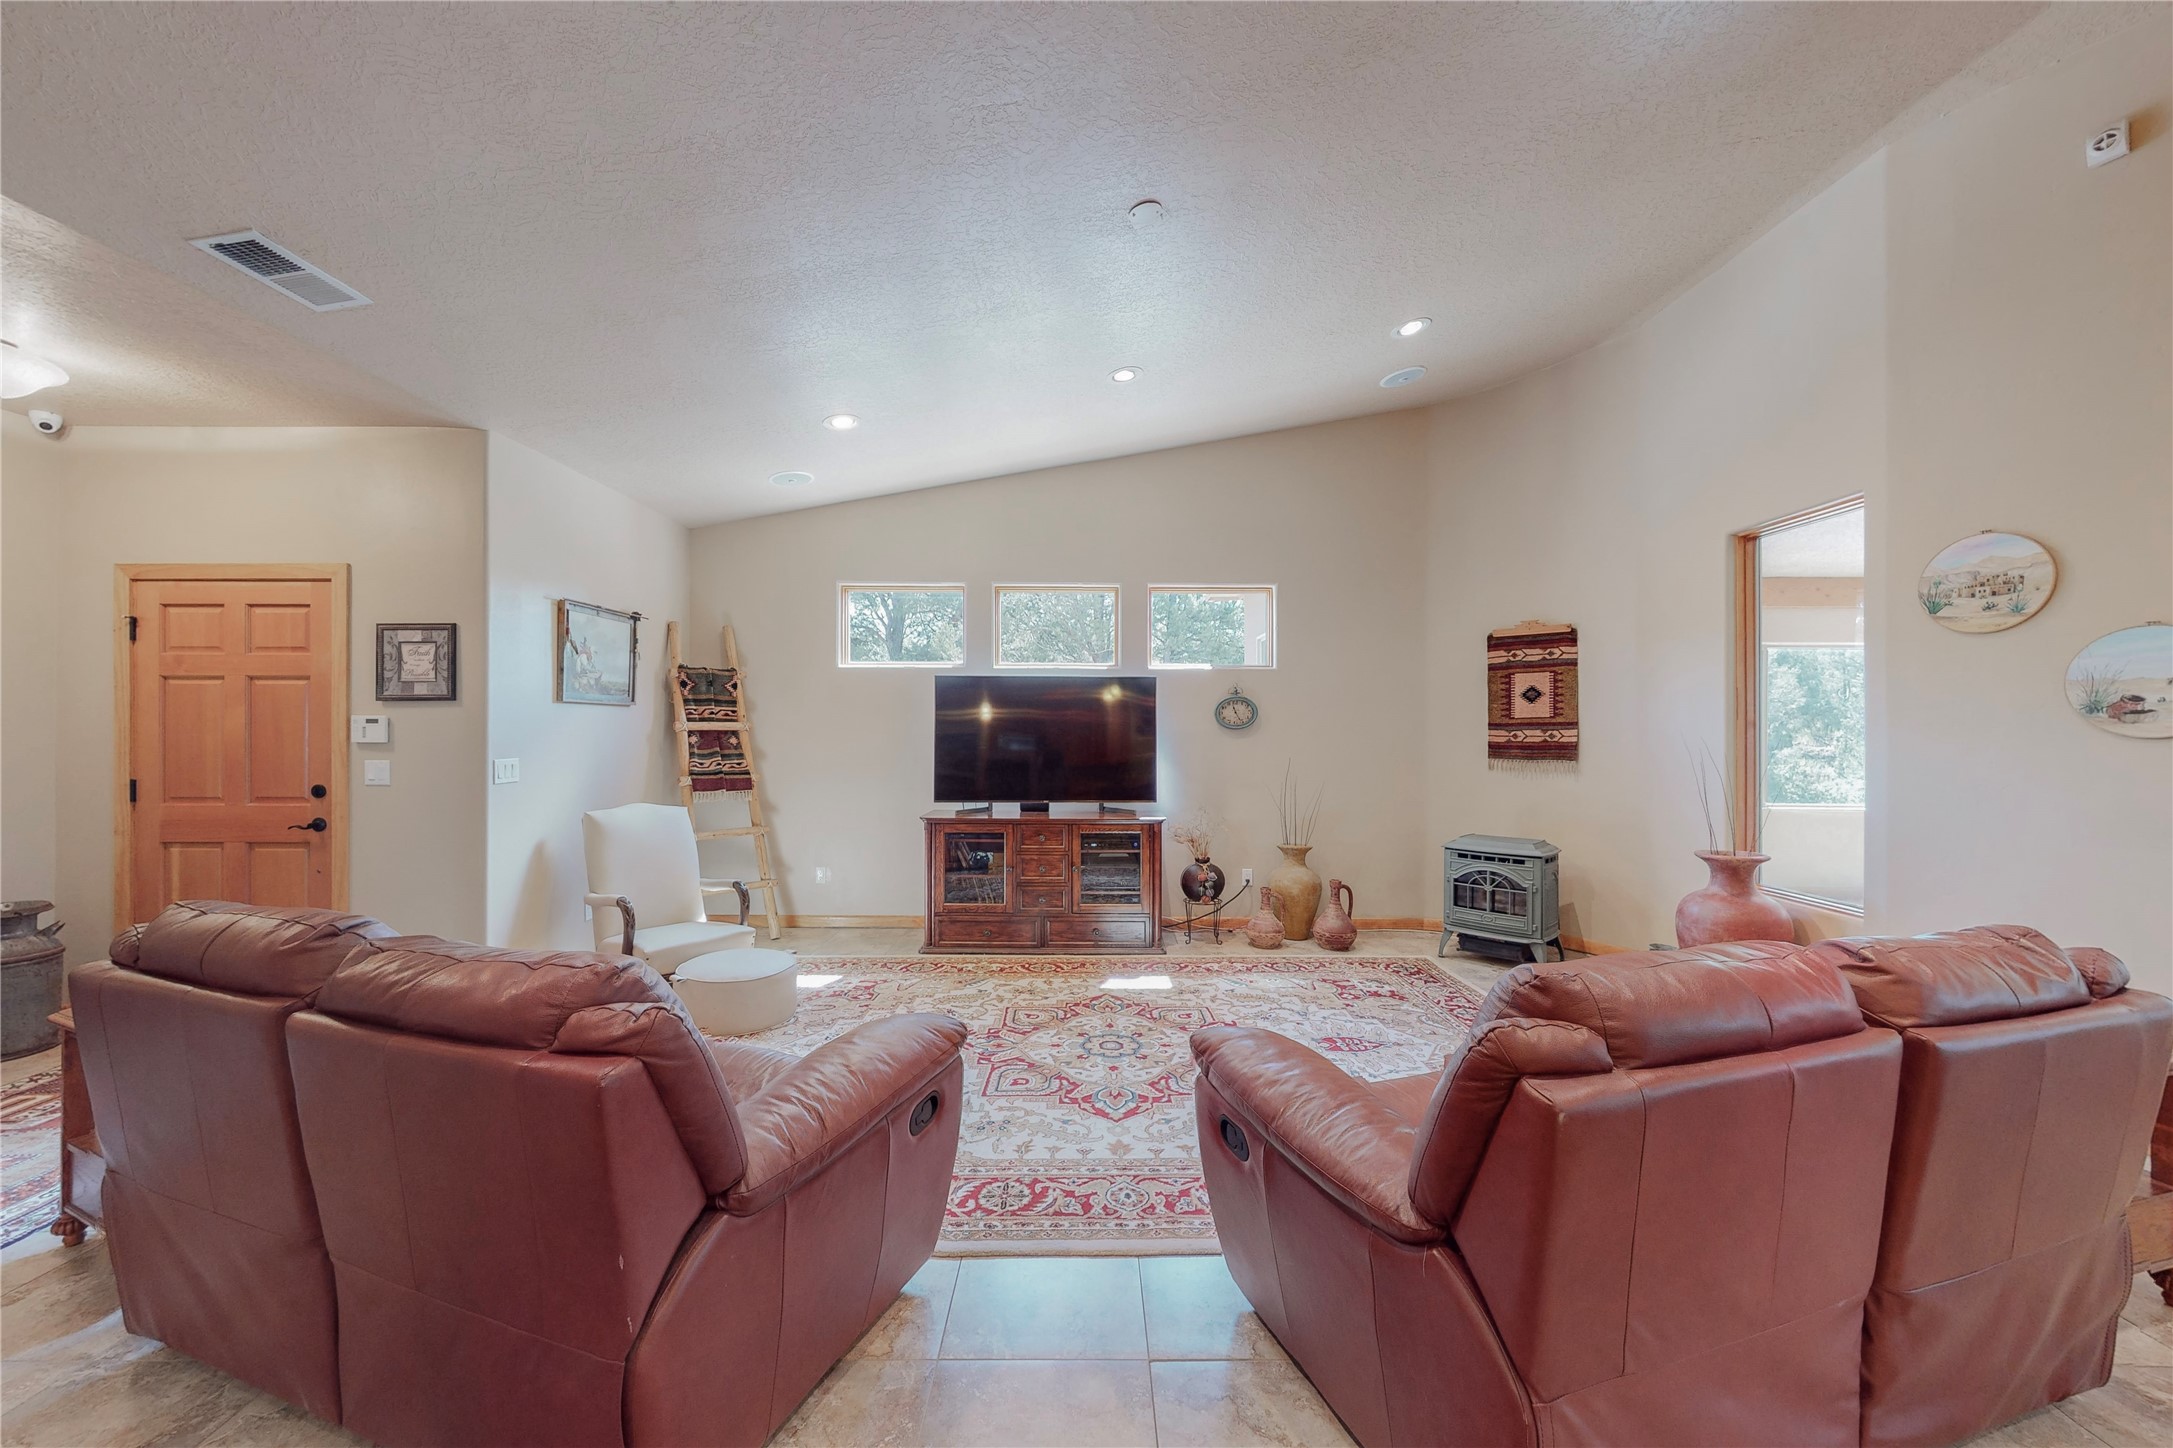 58 Express Boulevard, Sandia Park, New Mexico 87047, 4 Bedrooms Bedrooms, ,3 BathroomsBathrooms,Residential,For Sale,58 Express Boulevard,202233131